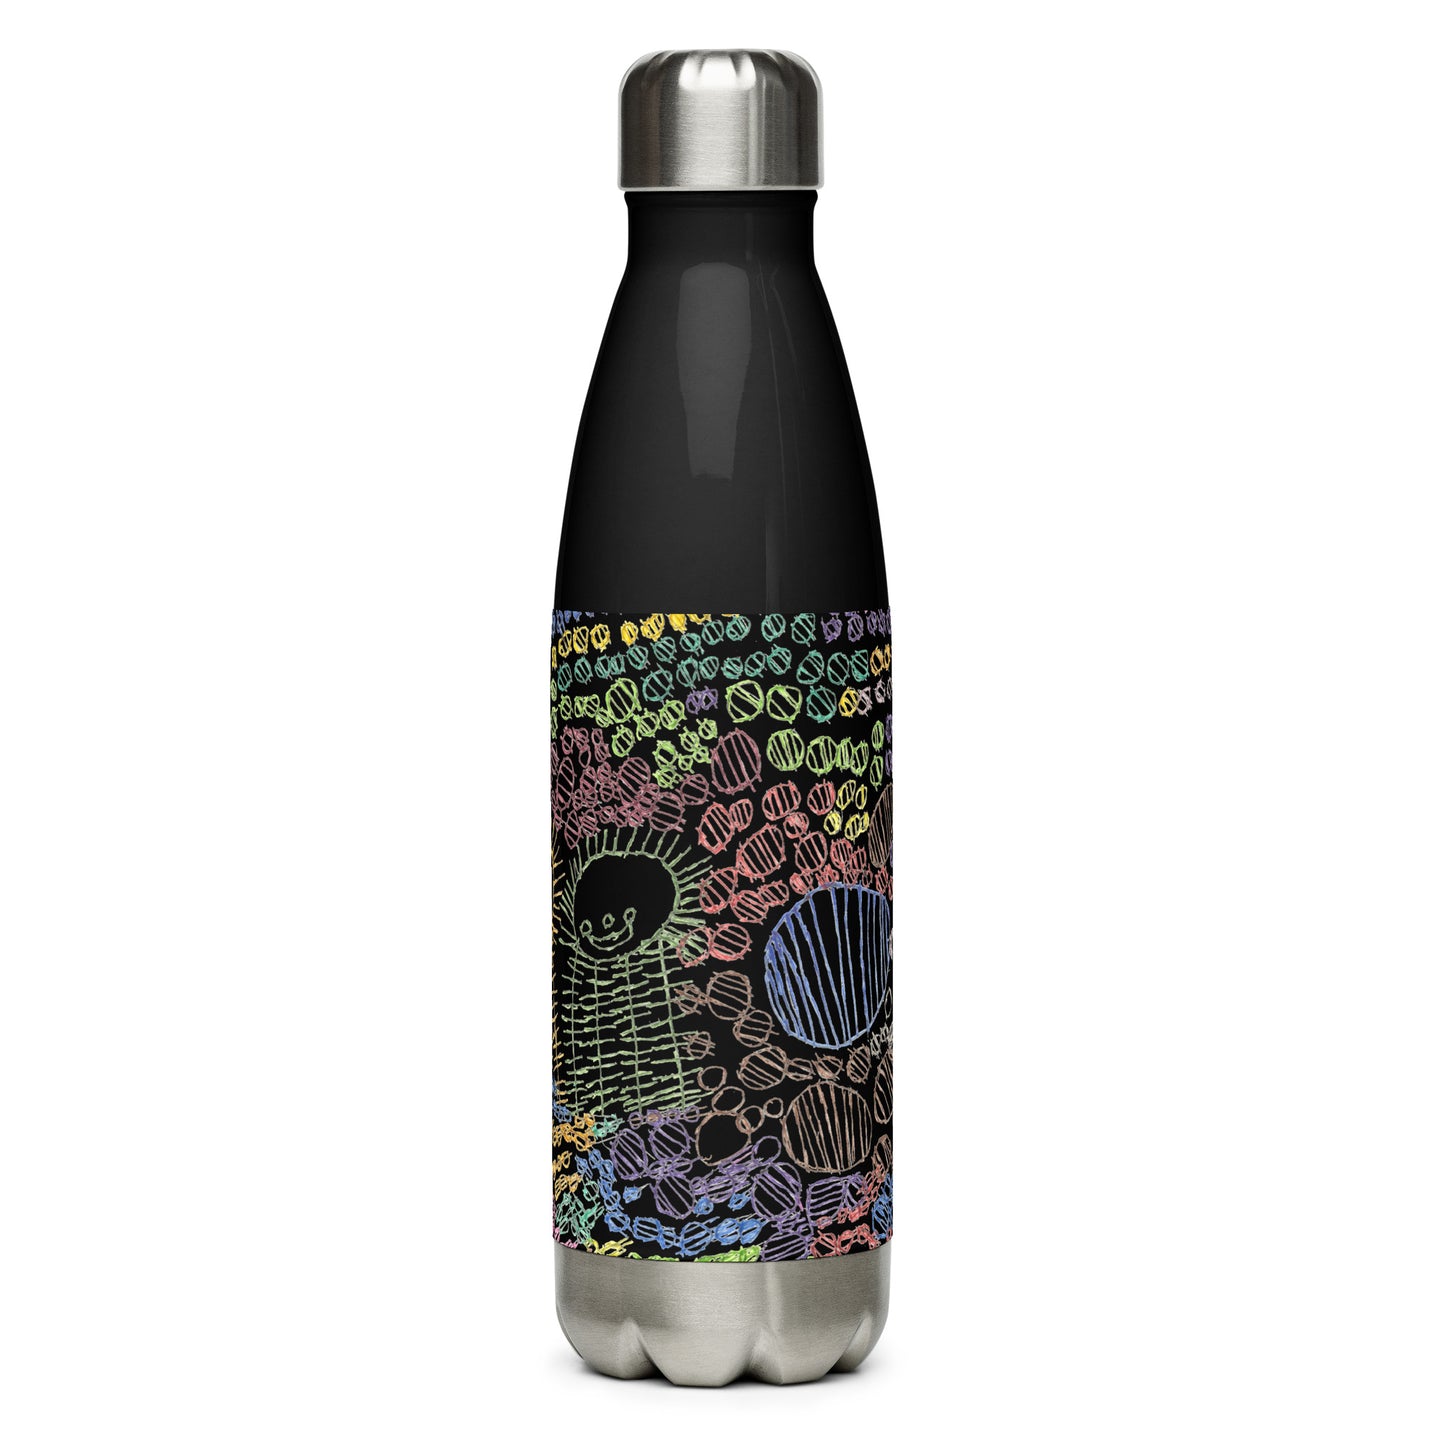 Stainless steel water bottle - "Eating Sushi"